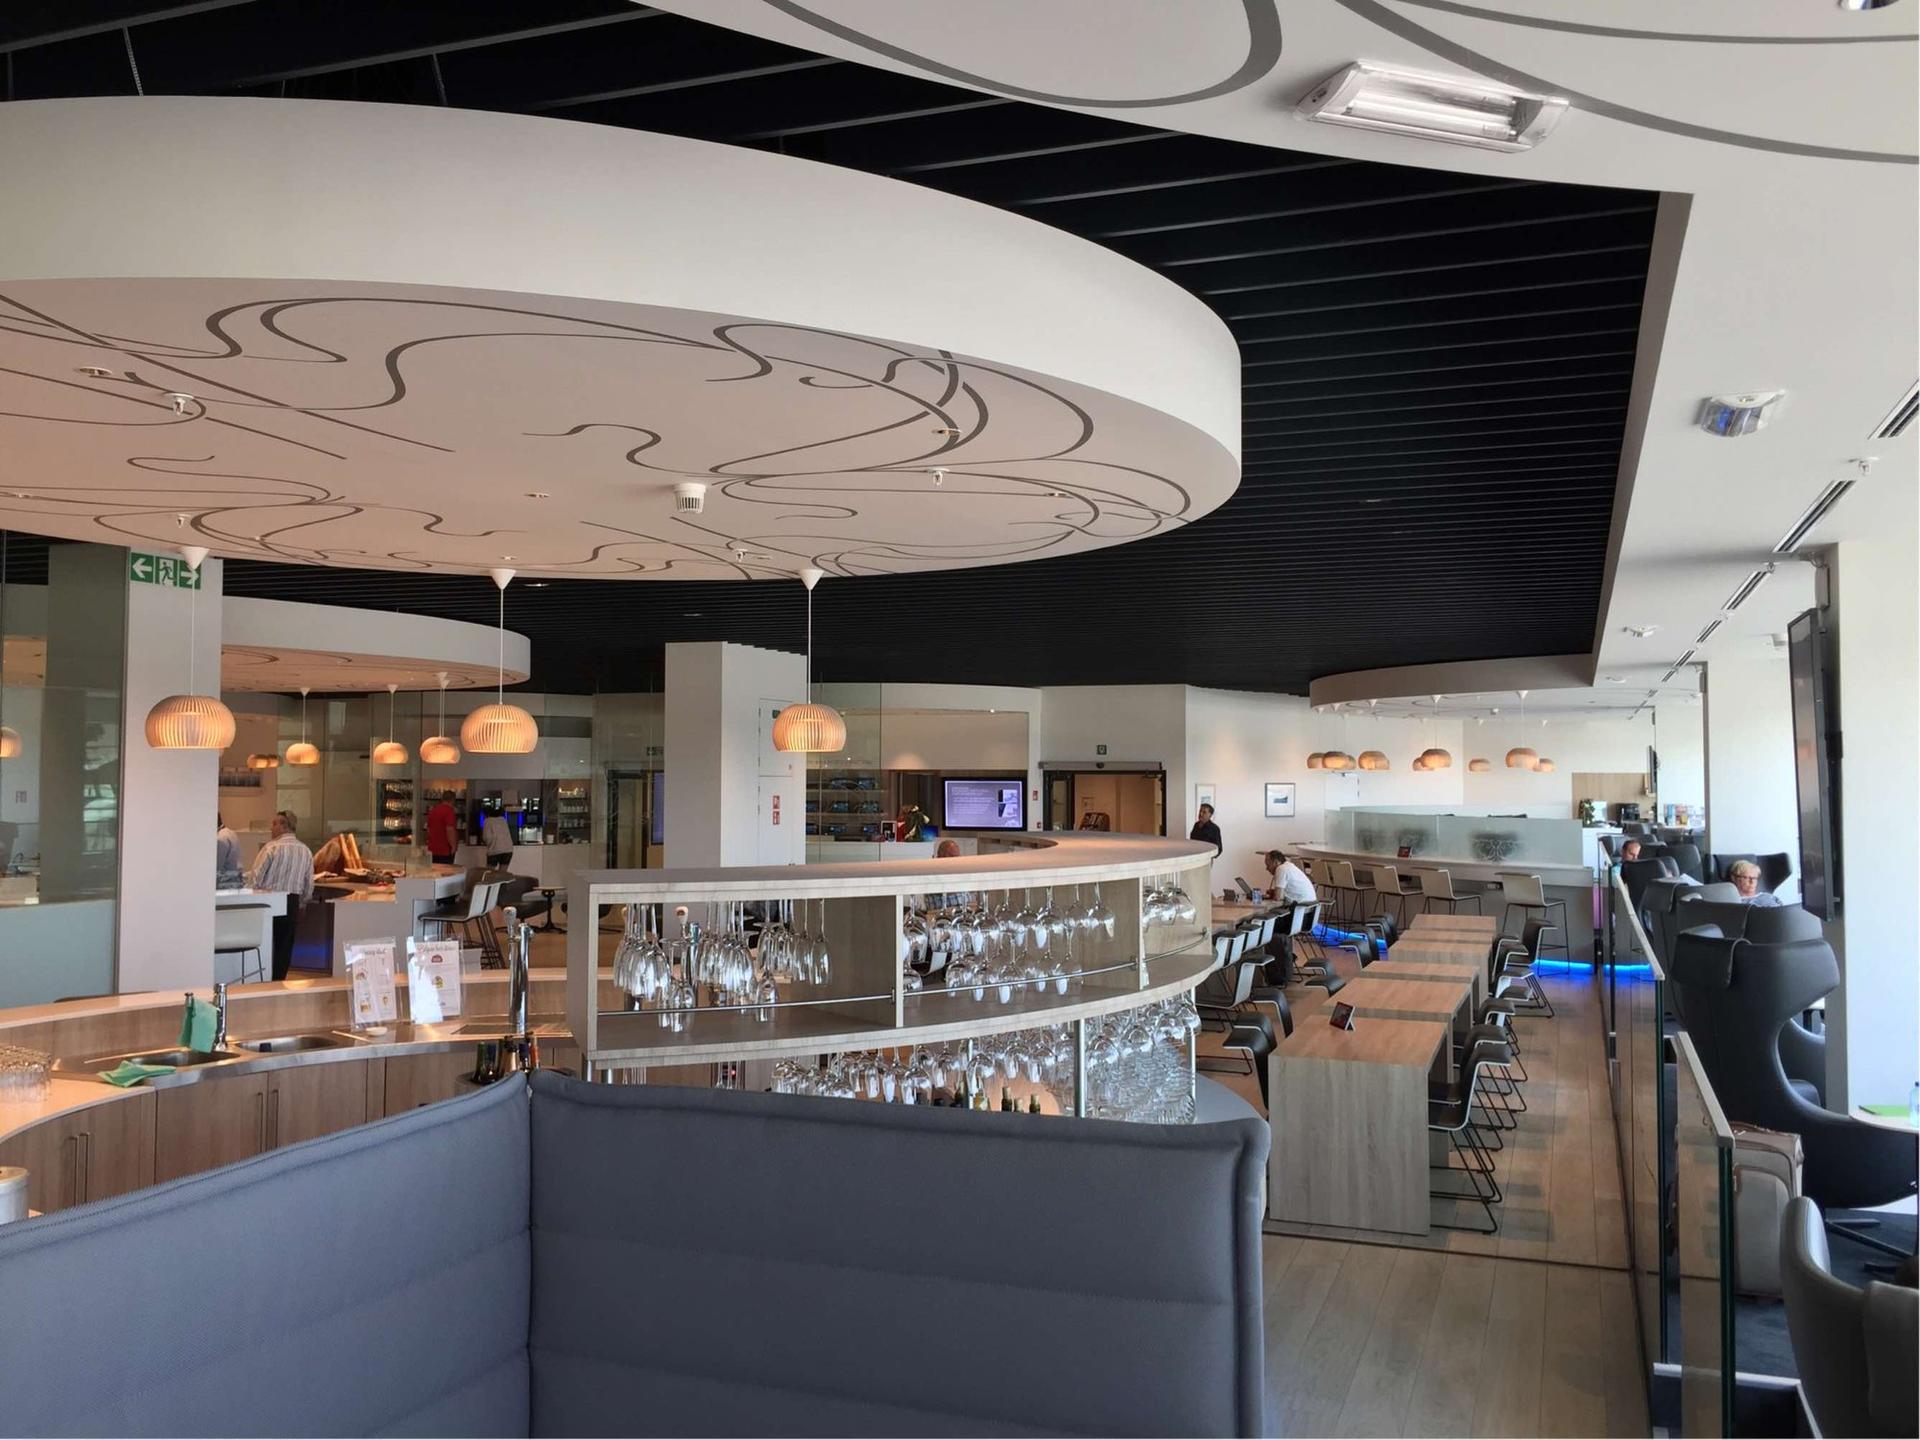 The Loft by Brussels Airlines and Lounge by Lexus image 3 of 23